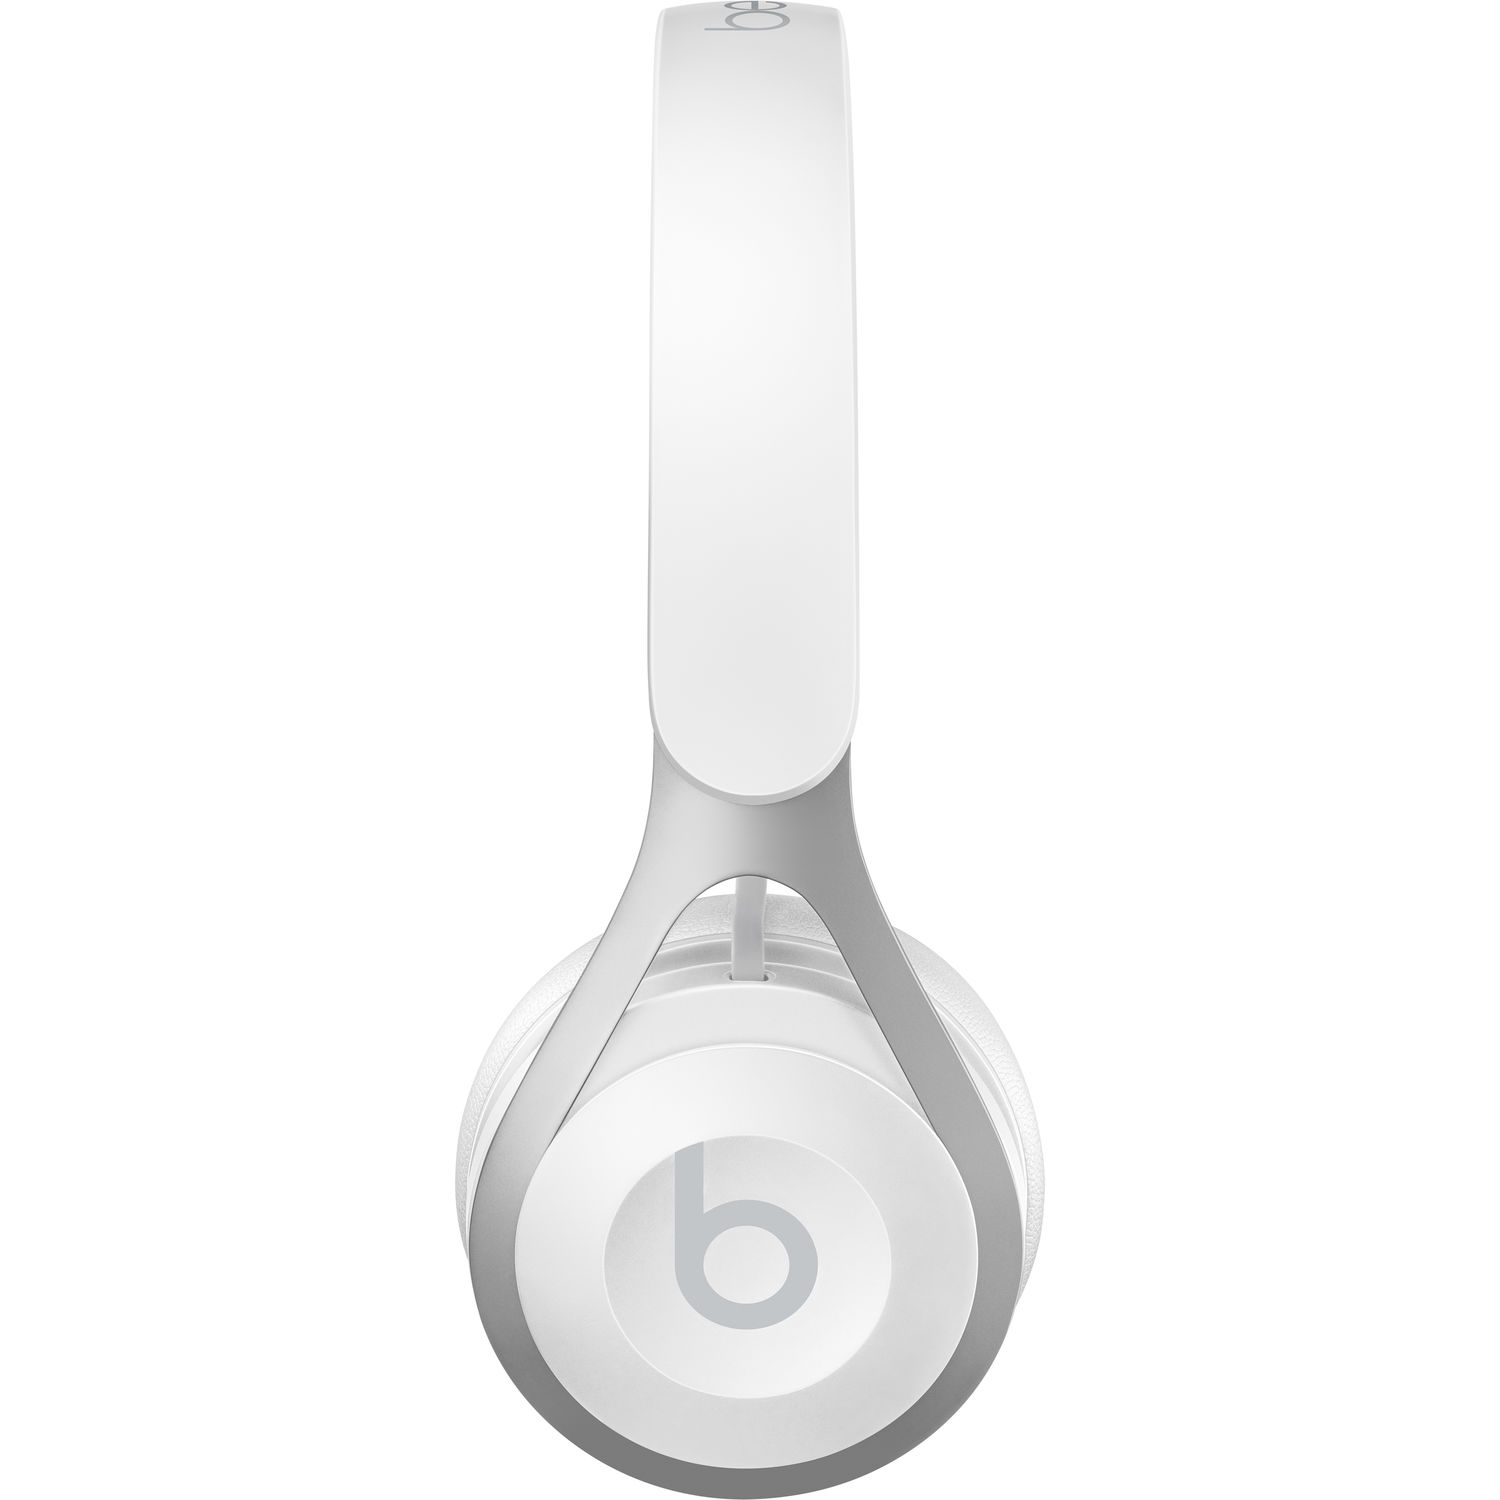 Beats EP Wired On-Ear Headphones (ML9A2ZM/A) - Battery Free for Unlimited Listening, Built in Mic and Controls - (White) - image 5 of 6